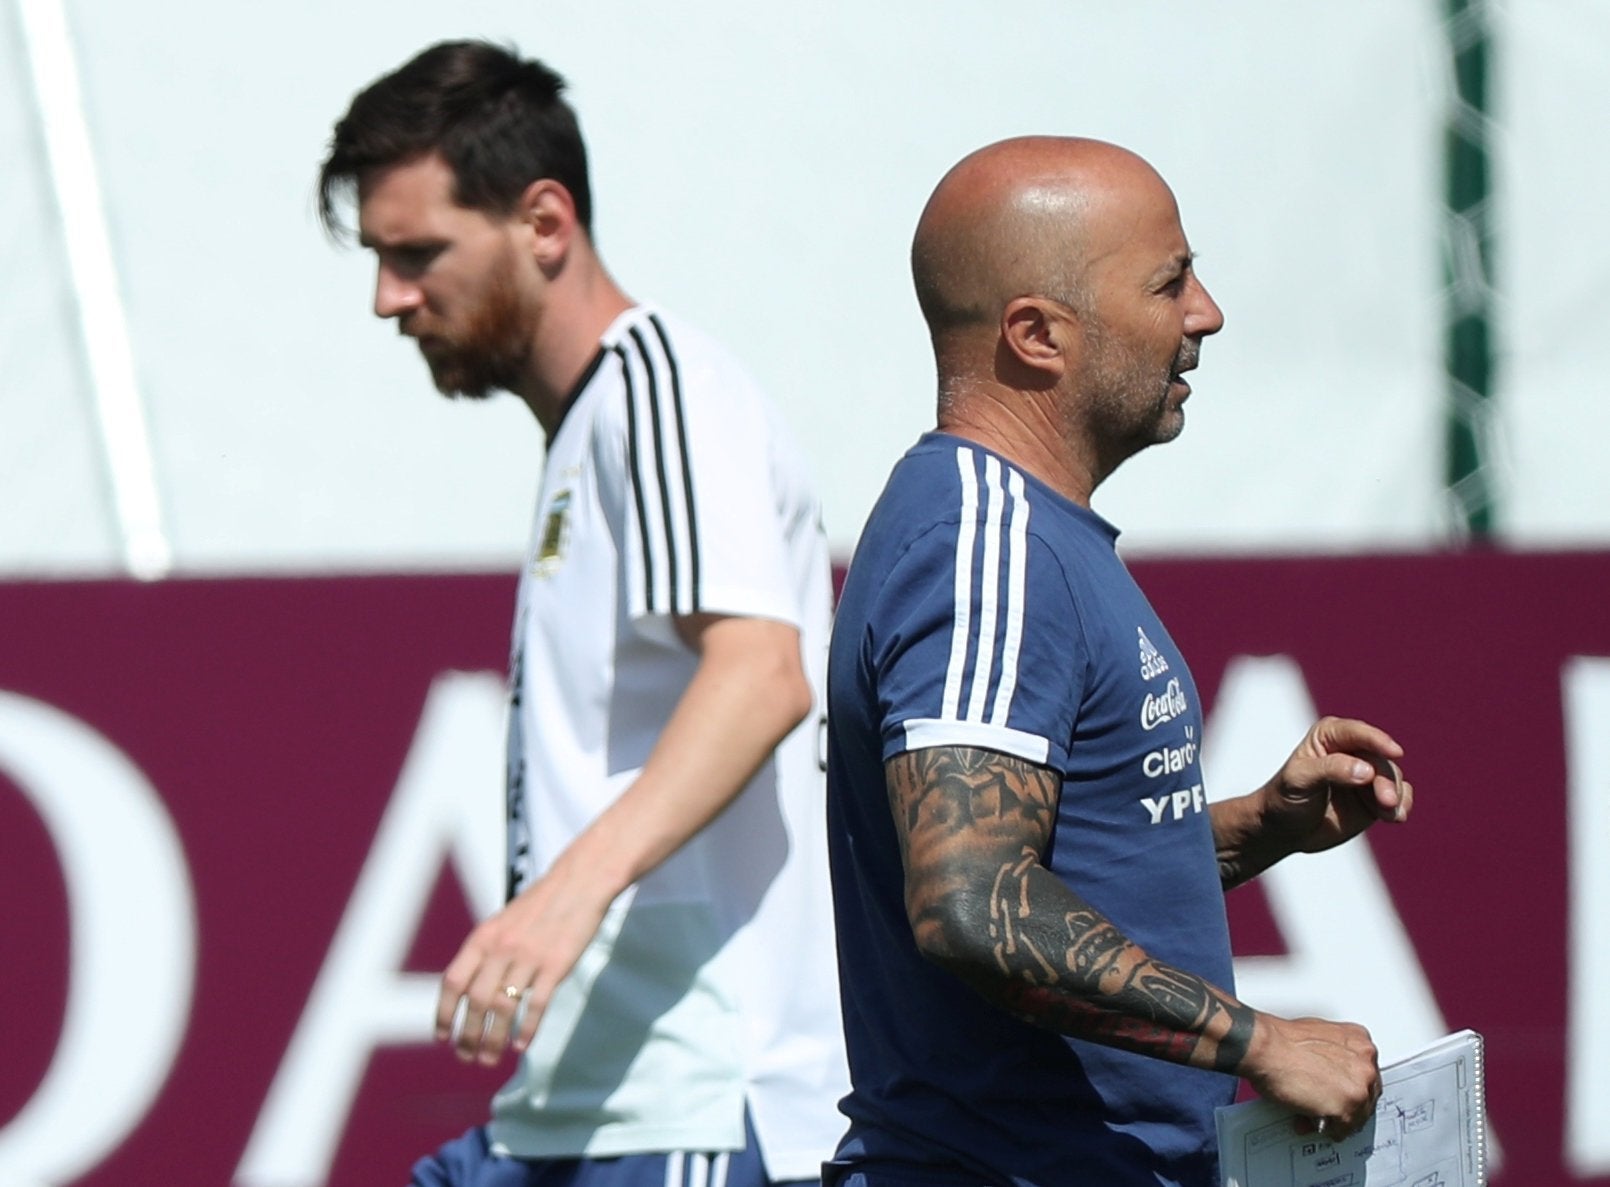 Coach Jorge Sampaoli's tactics and use of Messi?have come in for stiff criticism